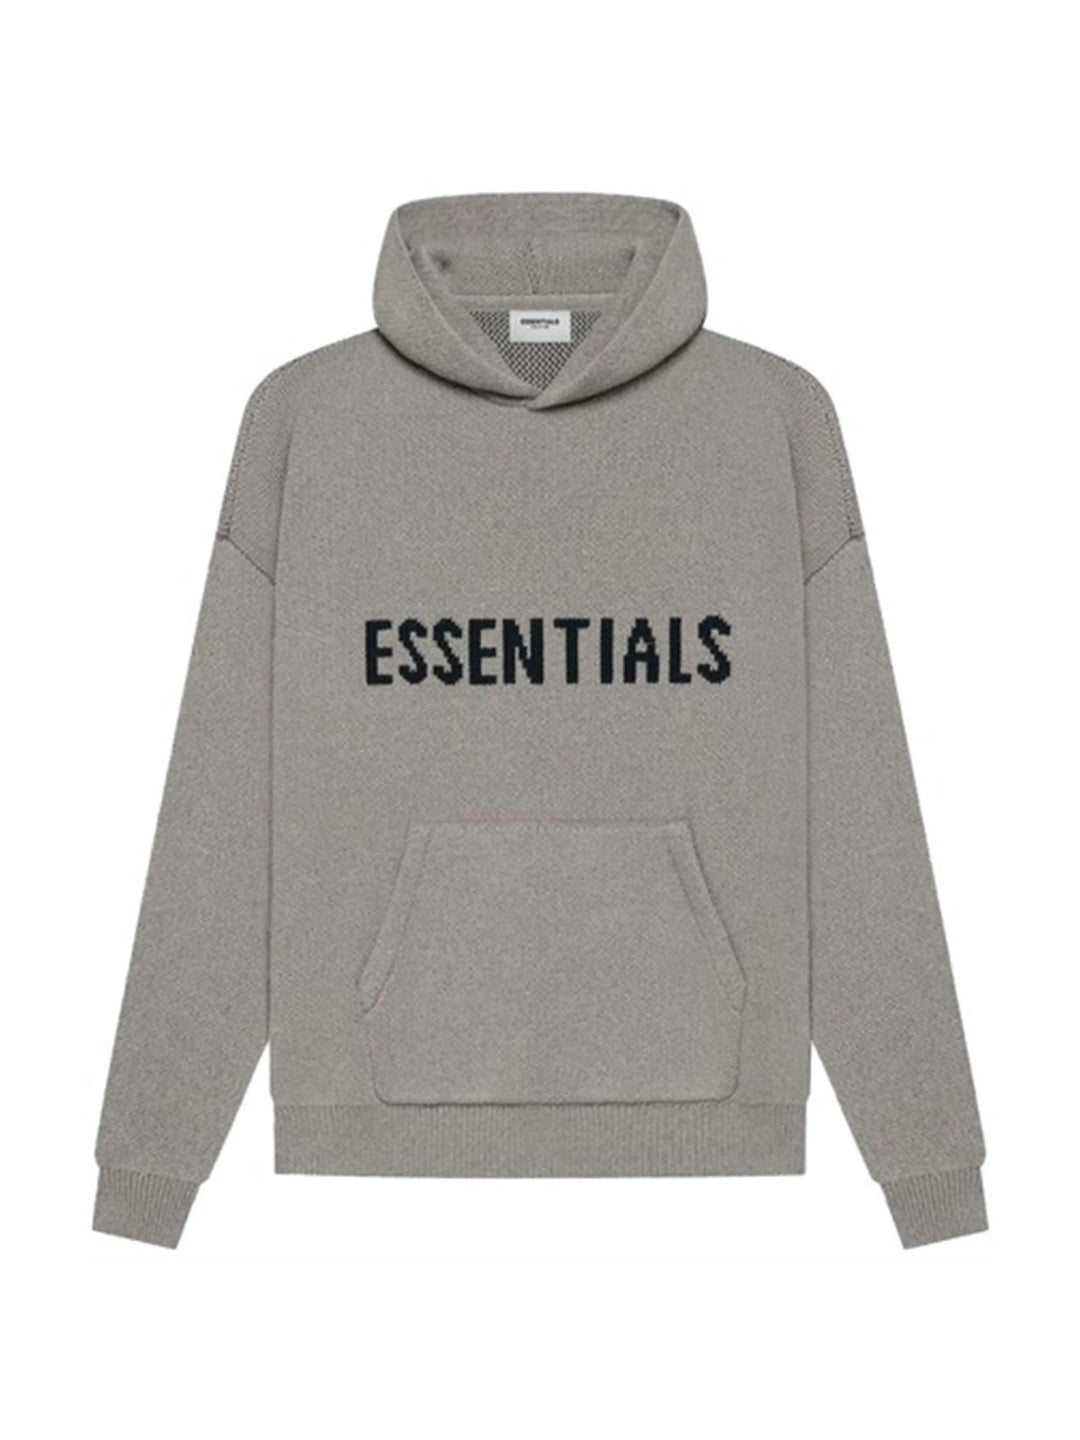 Fear Of God Essentials Knit Pullover Hoodie Dark Heather Oatmeal [SS21] Prior